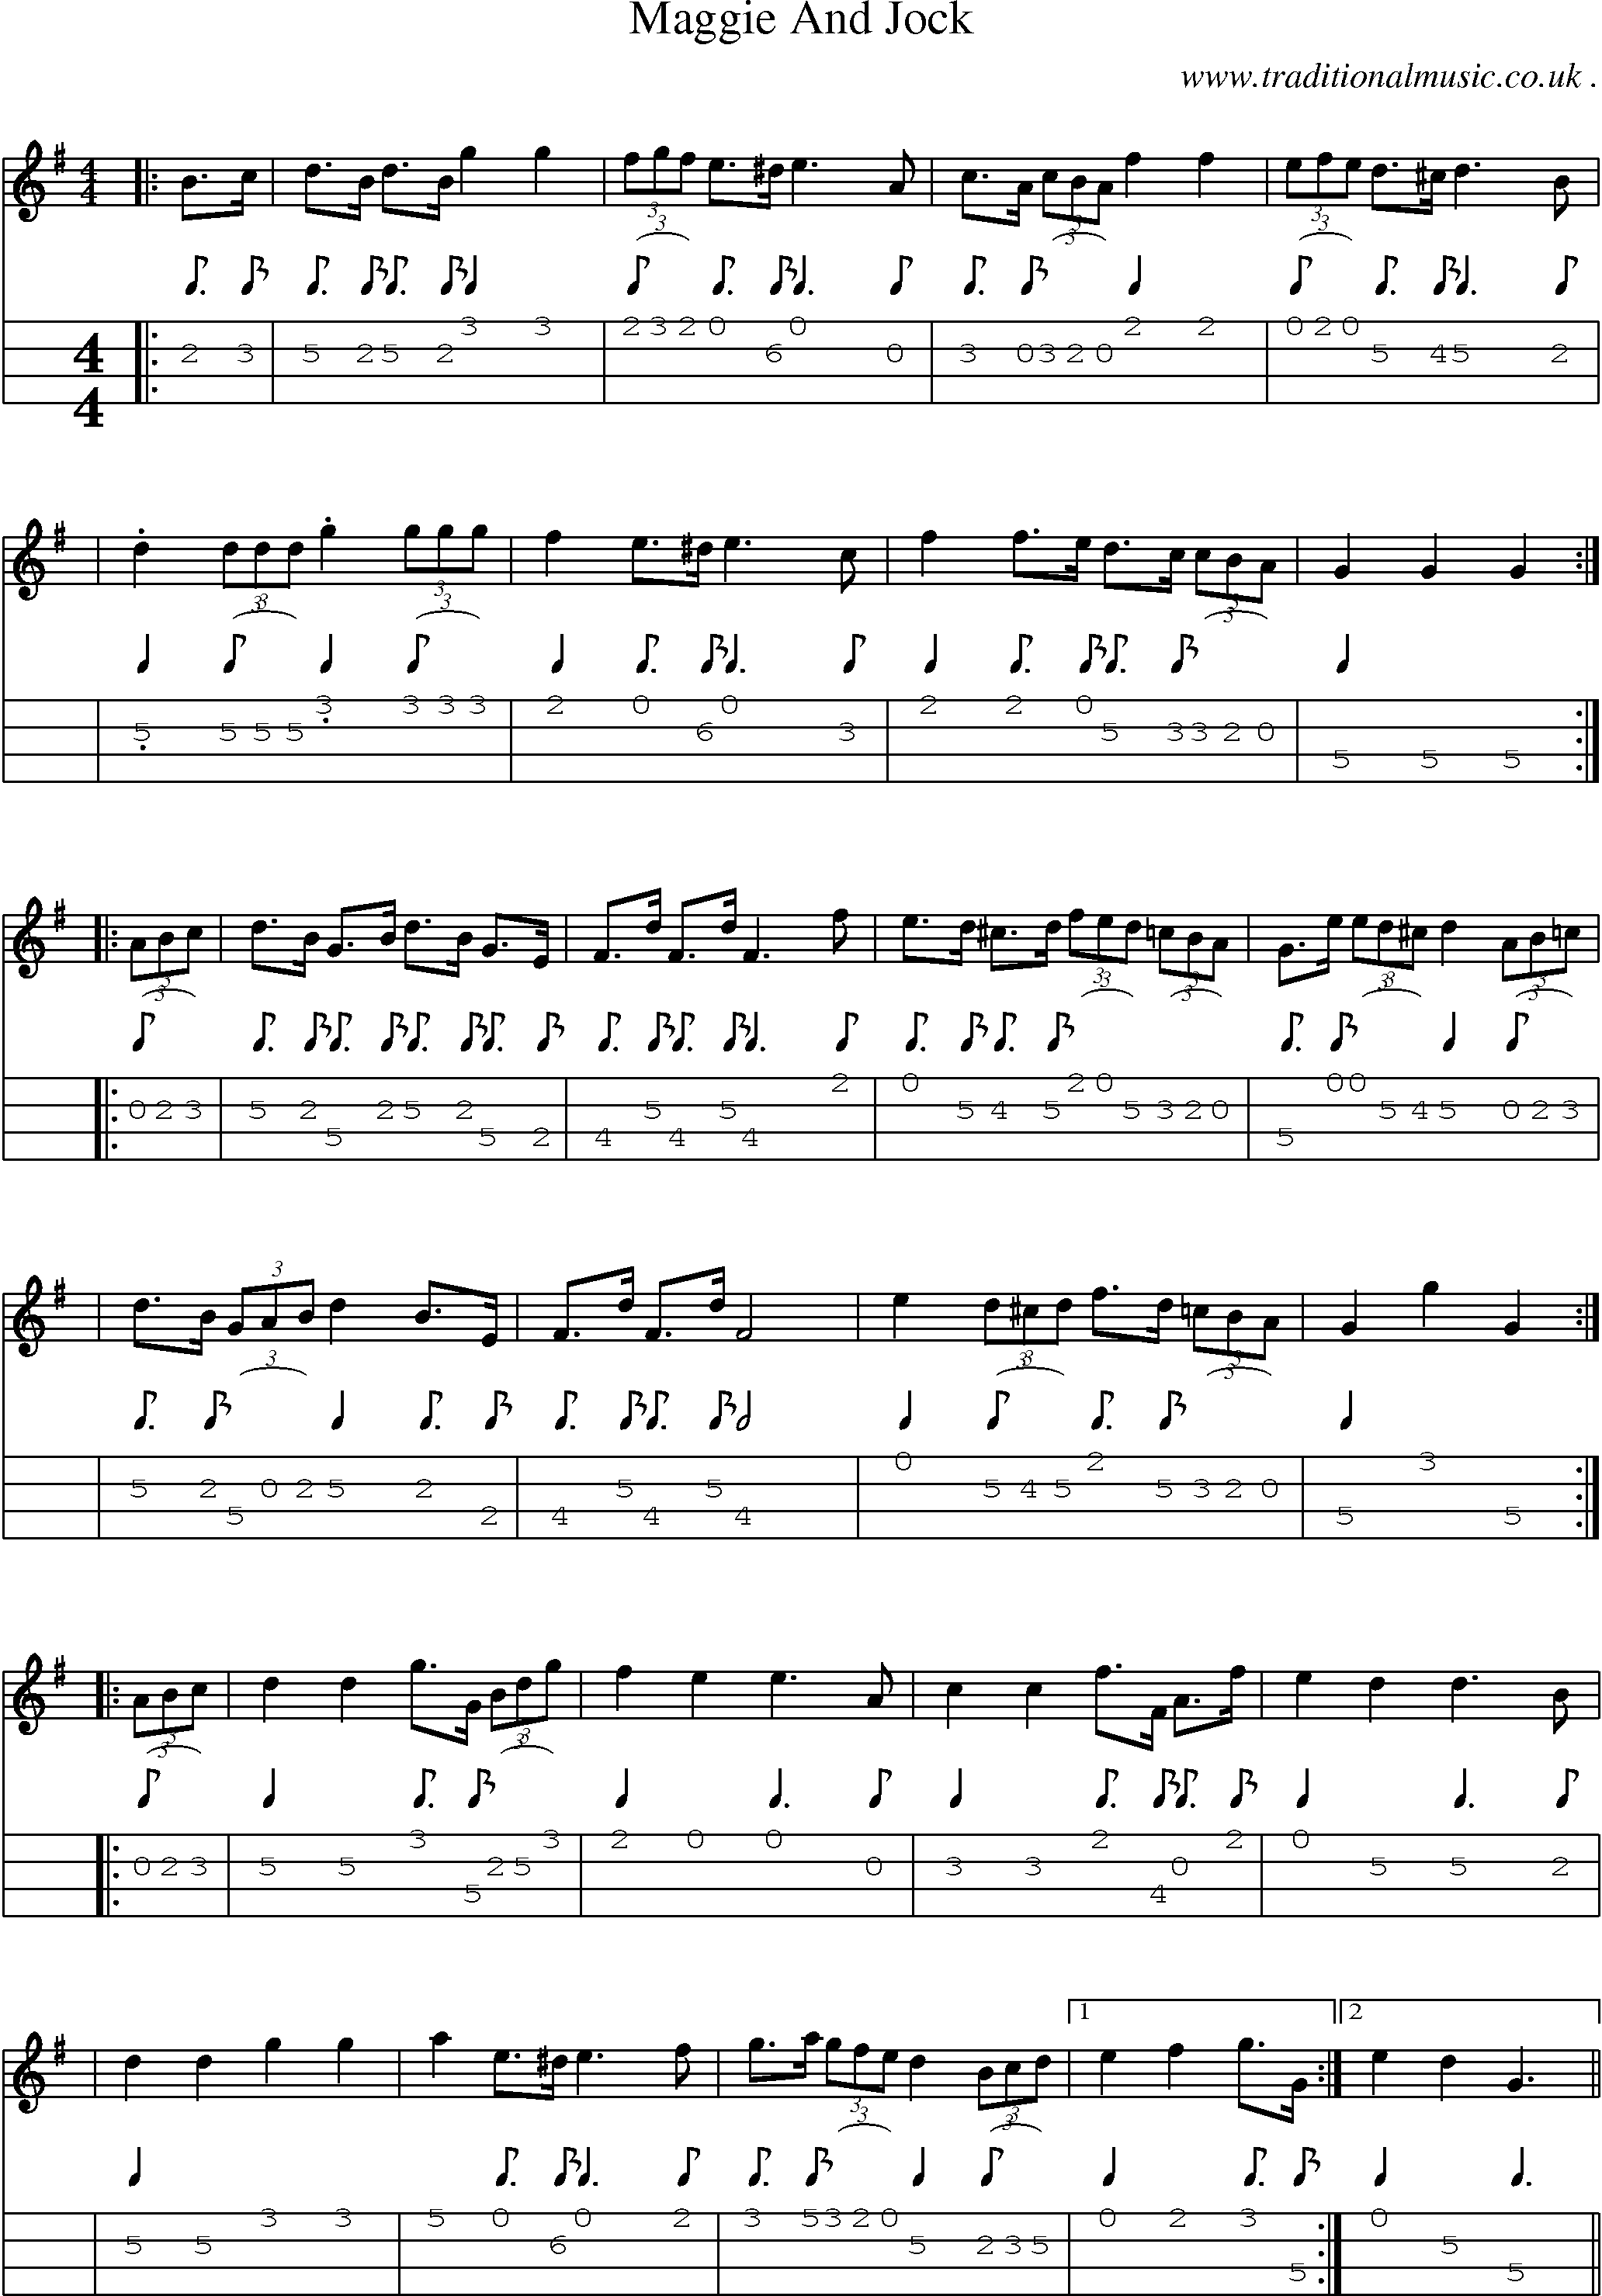 Sheet-music  score, Chords and Mandolin Tabs for Maggie And Jock